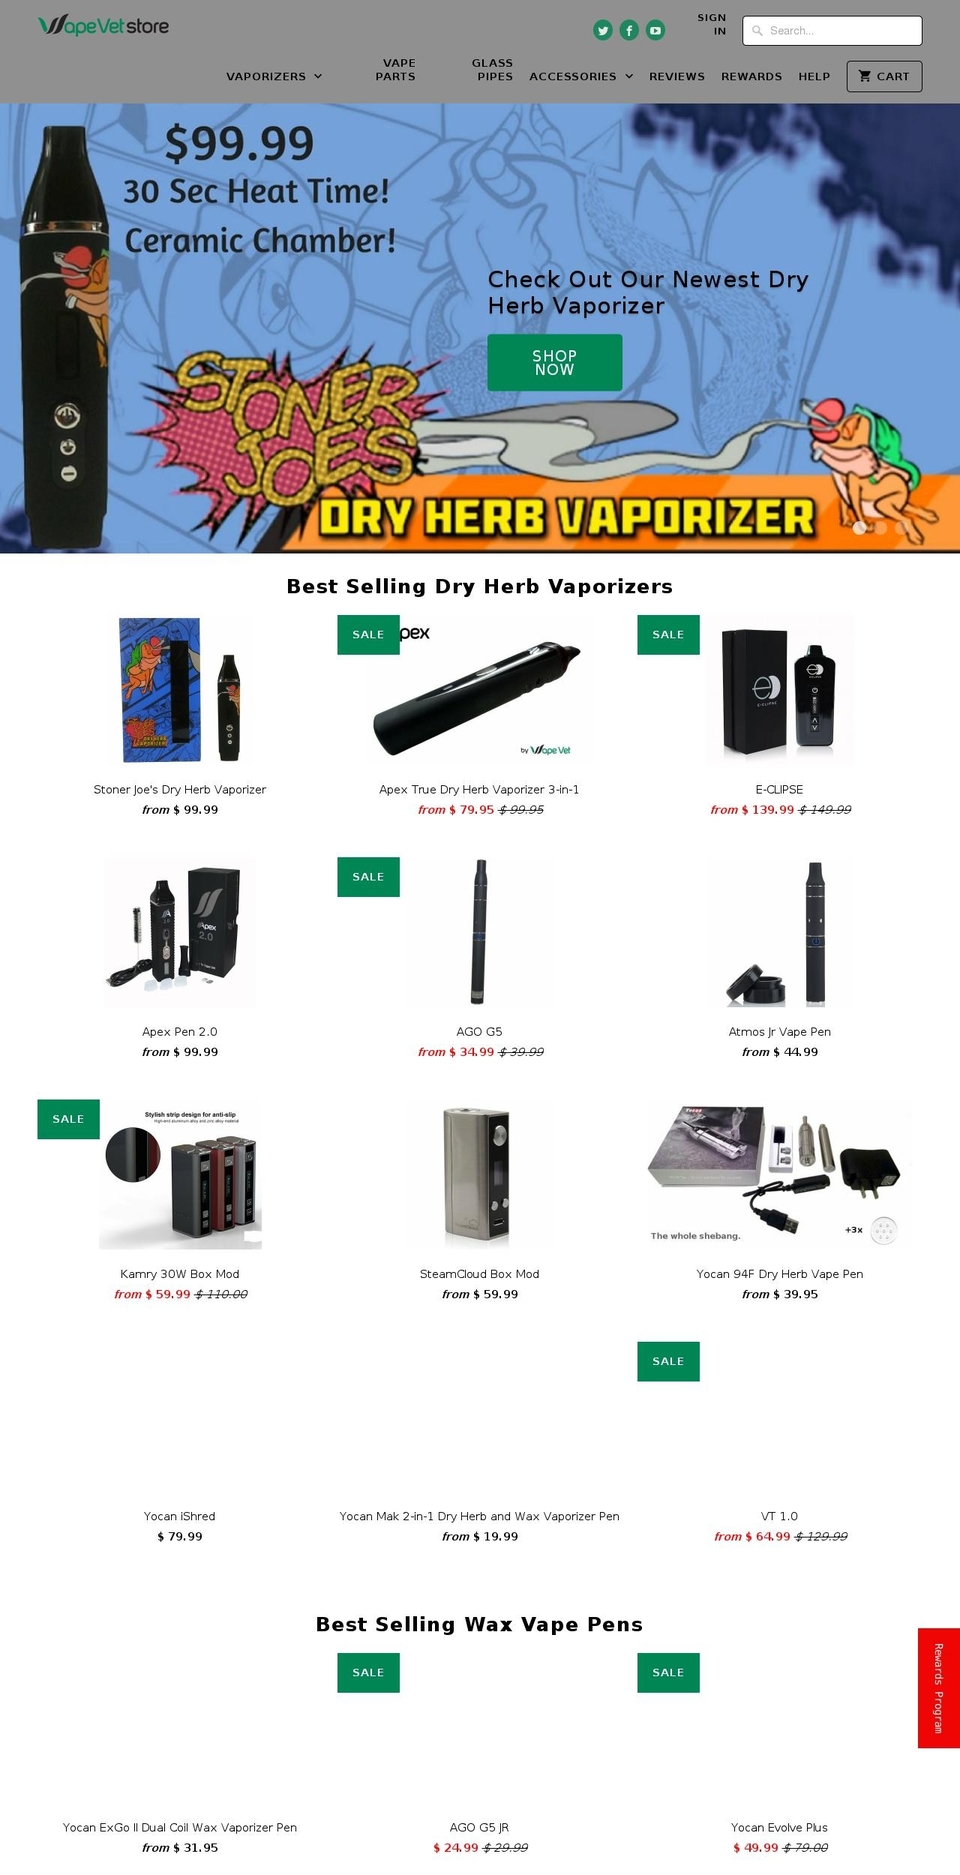 Live Theme Updated .. | OPT Shopify theme site example vapevetstore.com